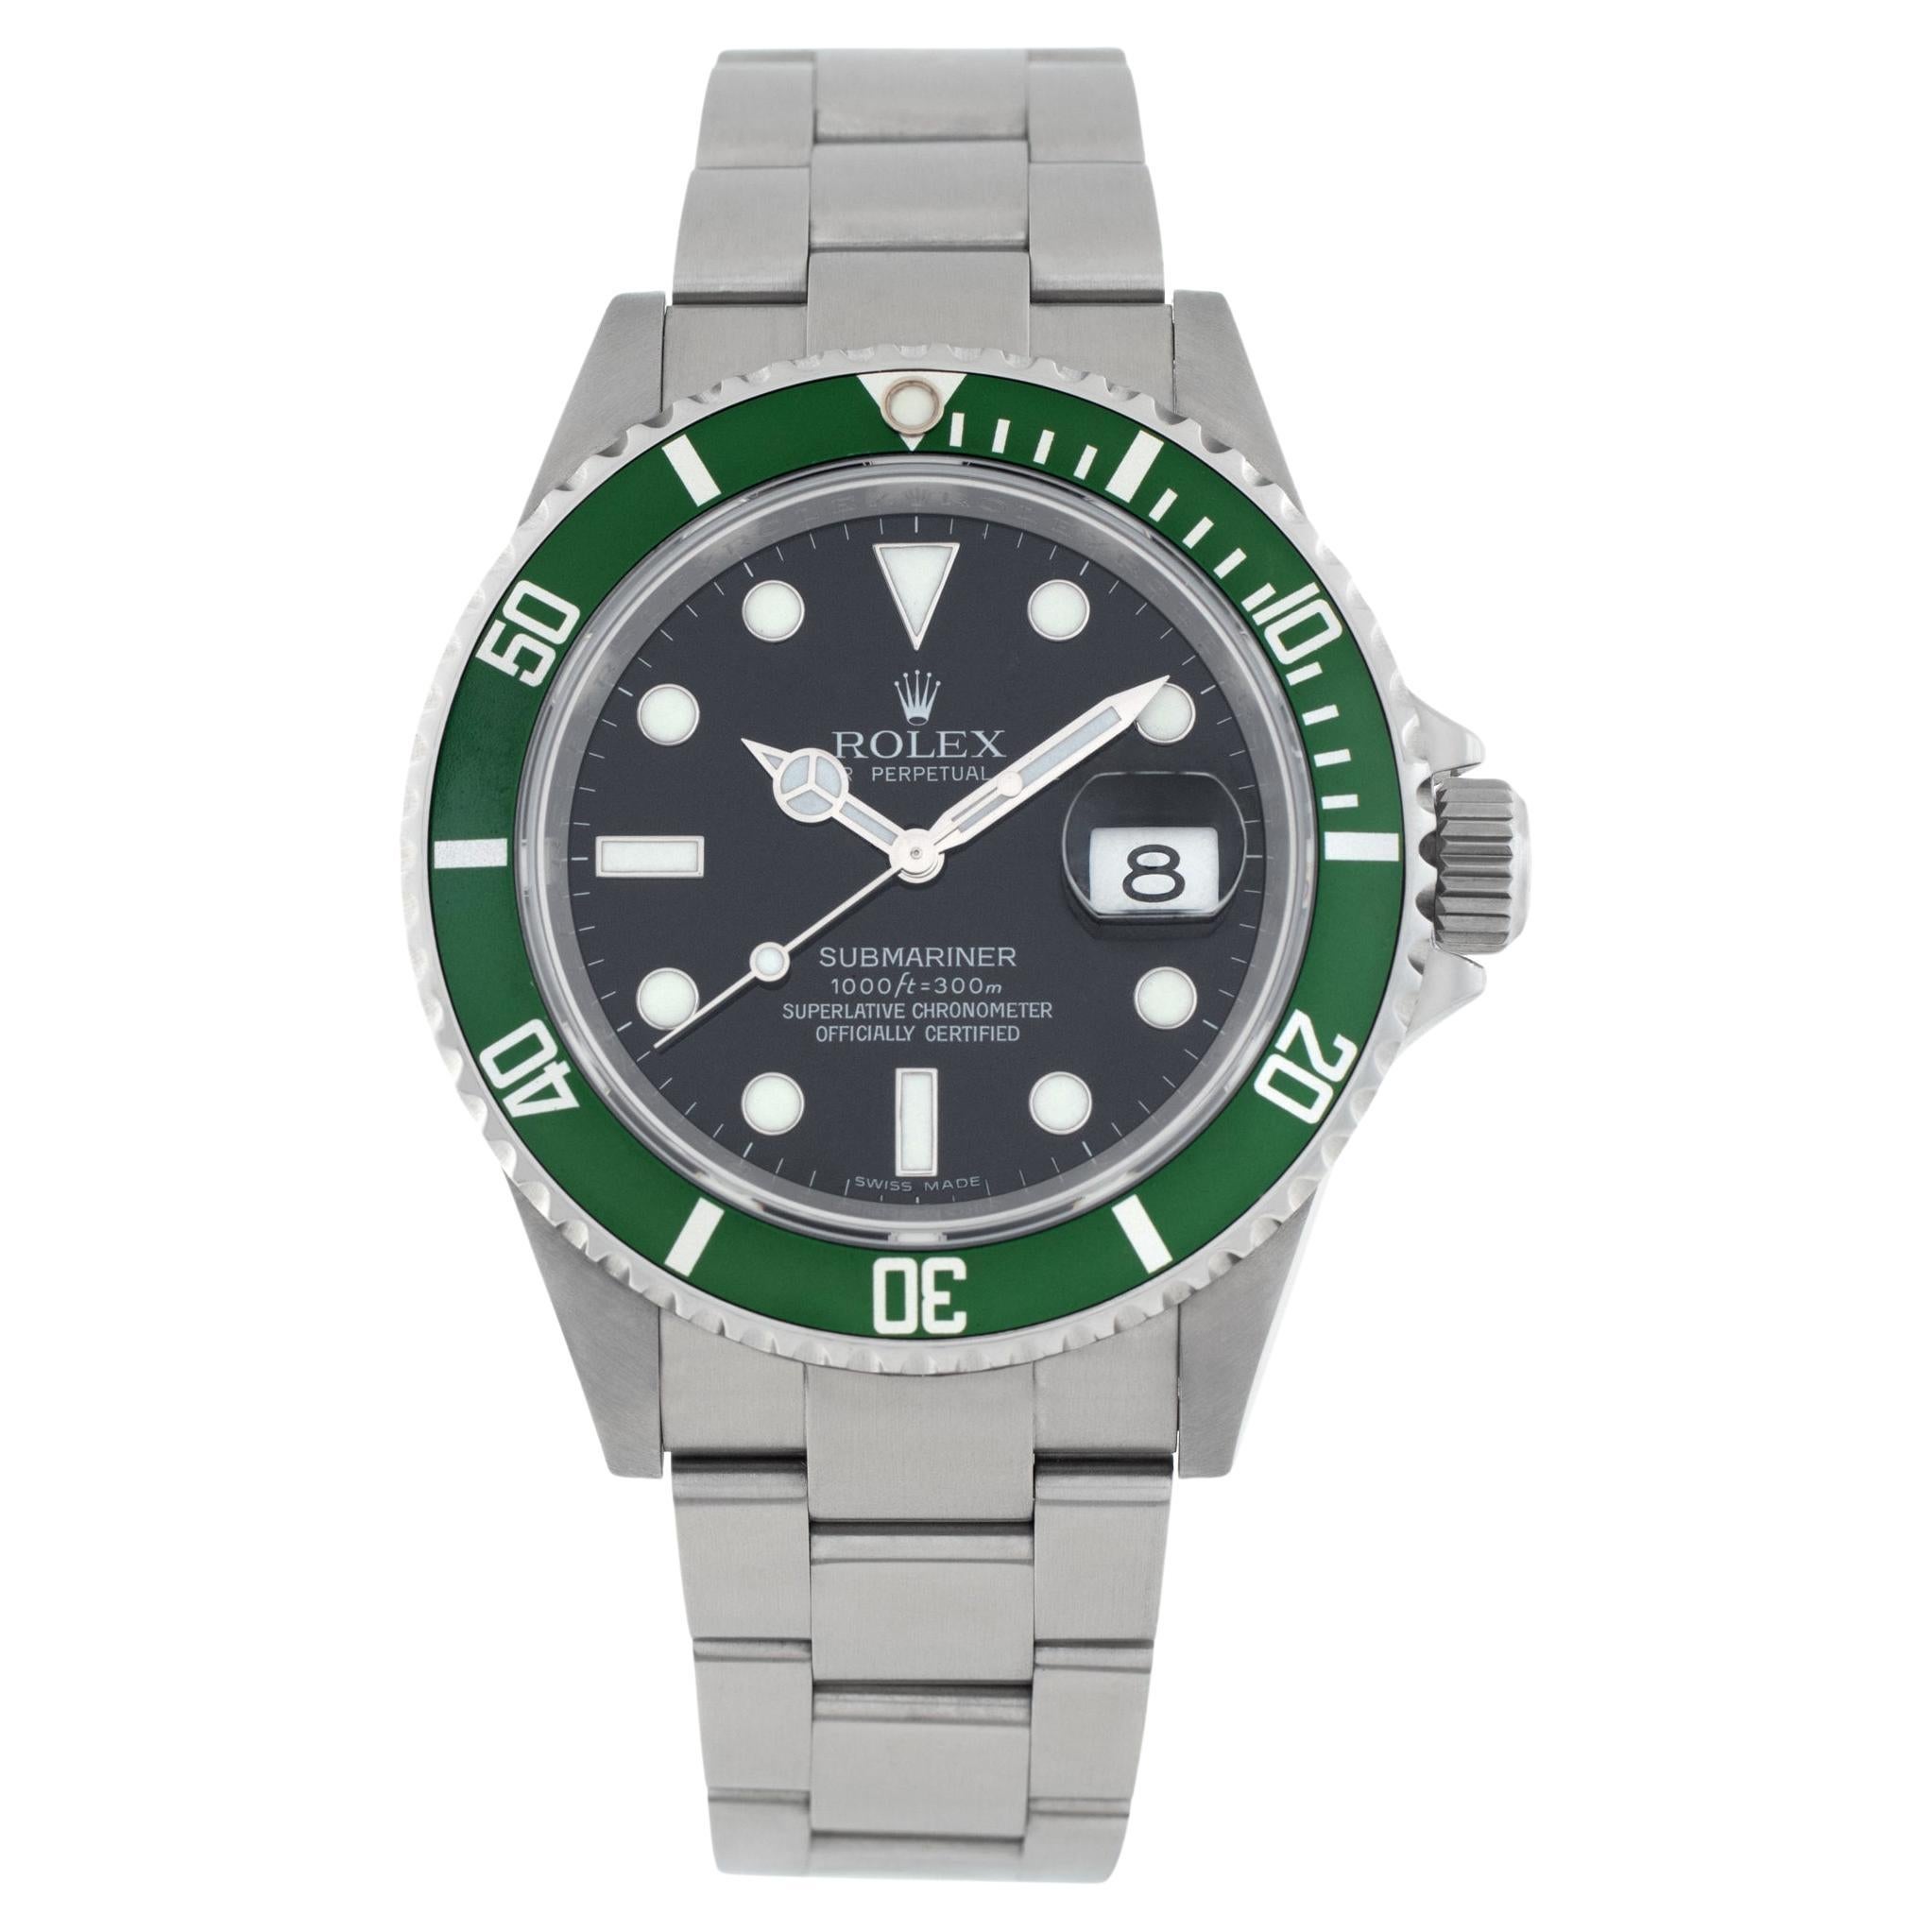 Rolex Submariner Kermit 16610lv Stainless Steel Black dial 40mm Automatic watch For Sale